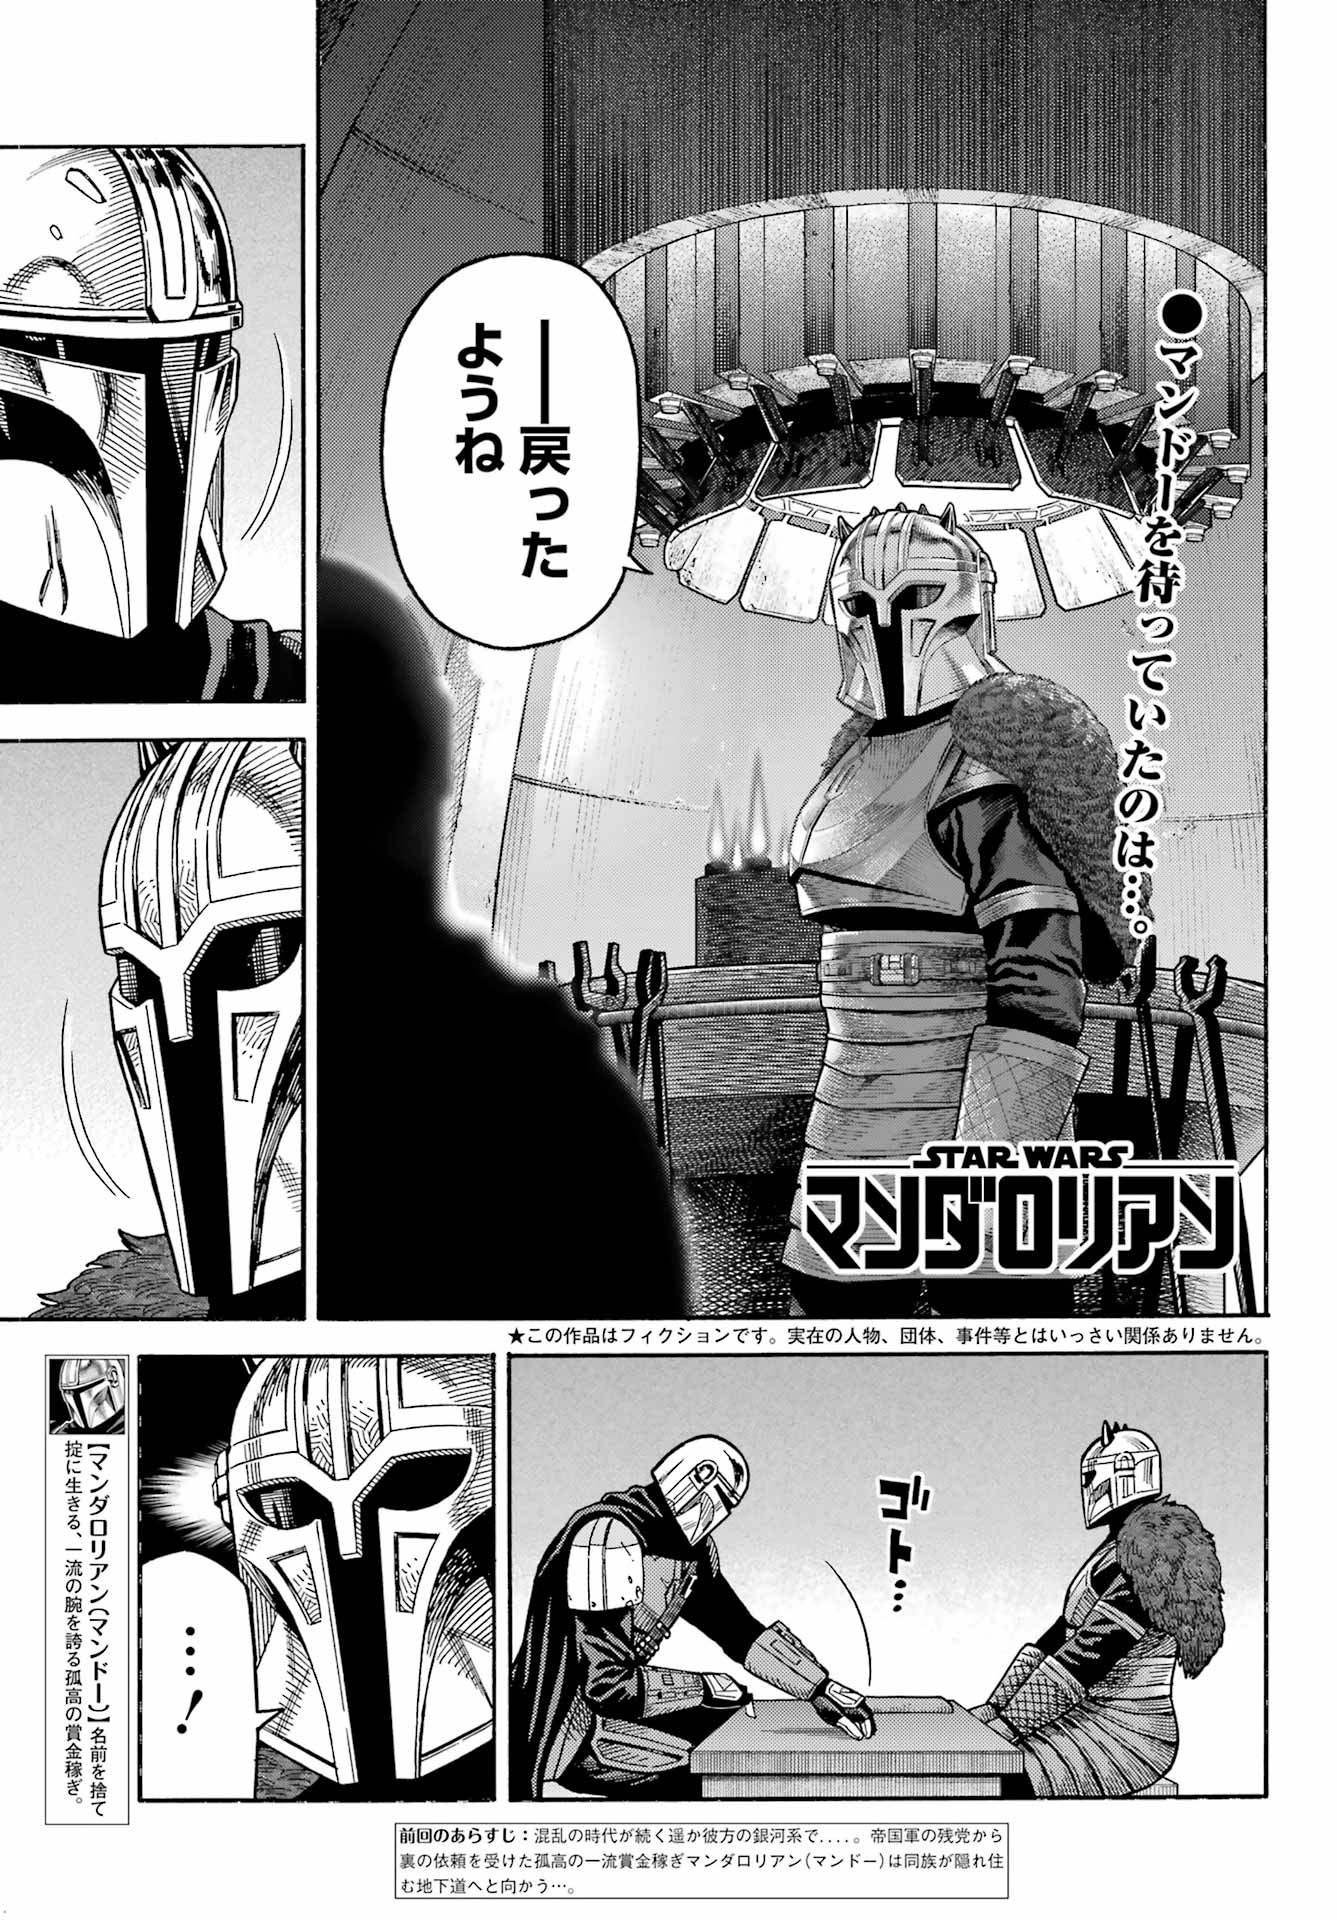 Star Wars: The Mandalorian - Chapter 03 - Page 1